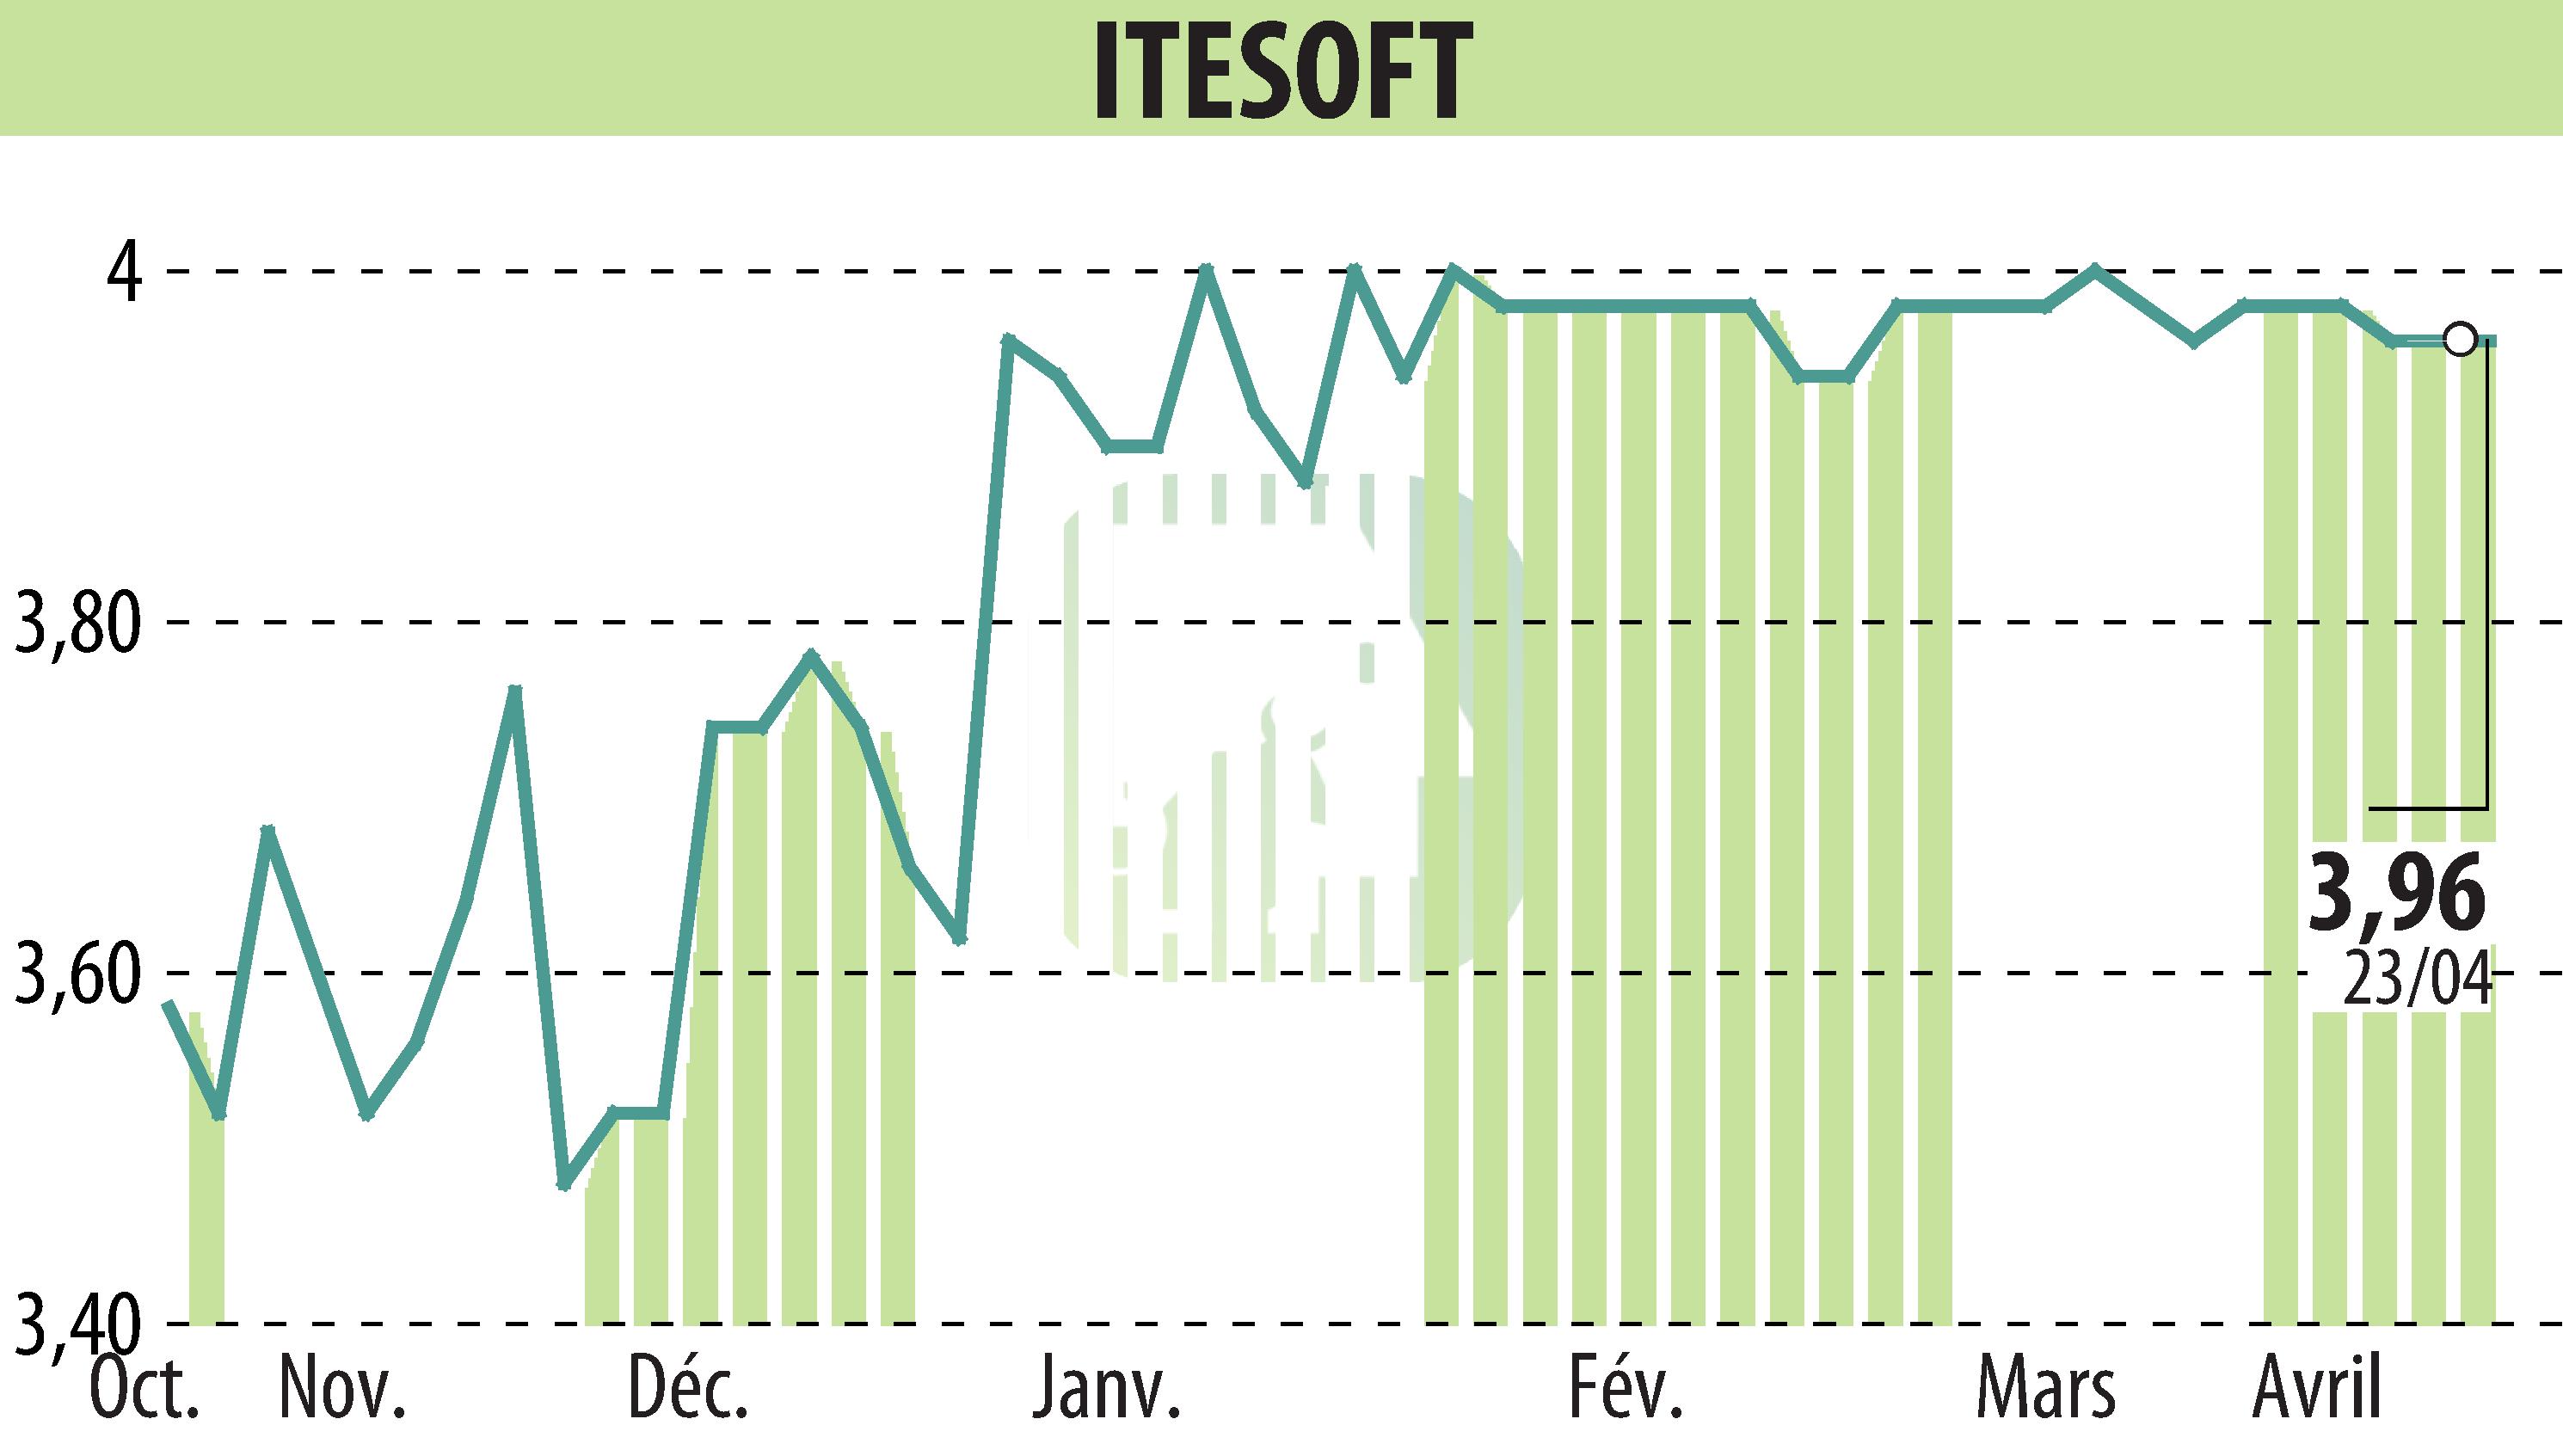 Stock price chart of ITESOFT (EPA:ITE) showing fluctuations.